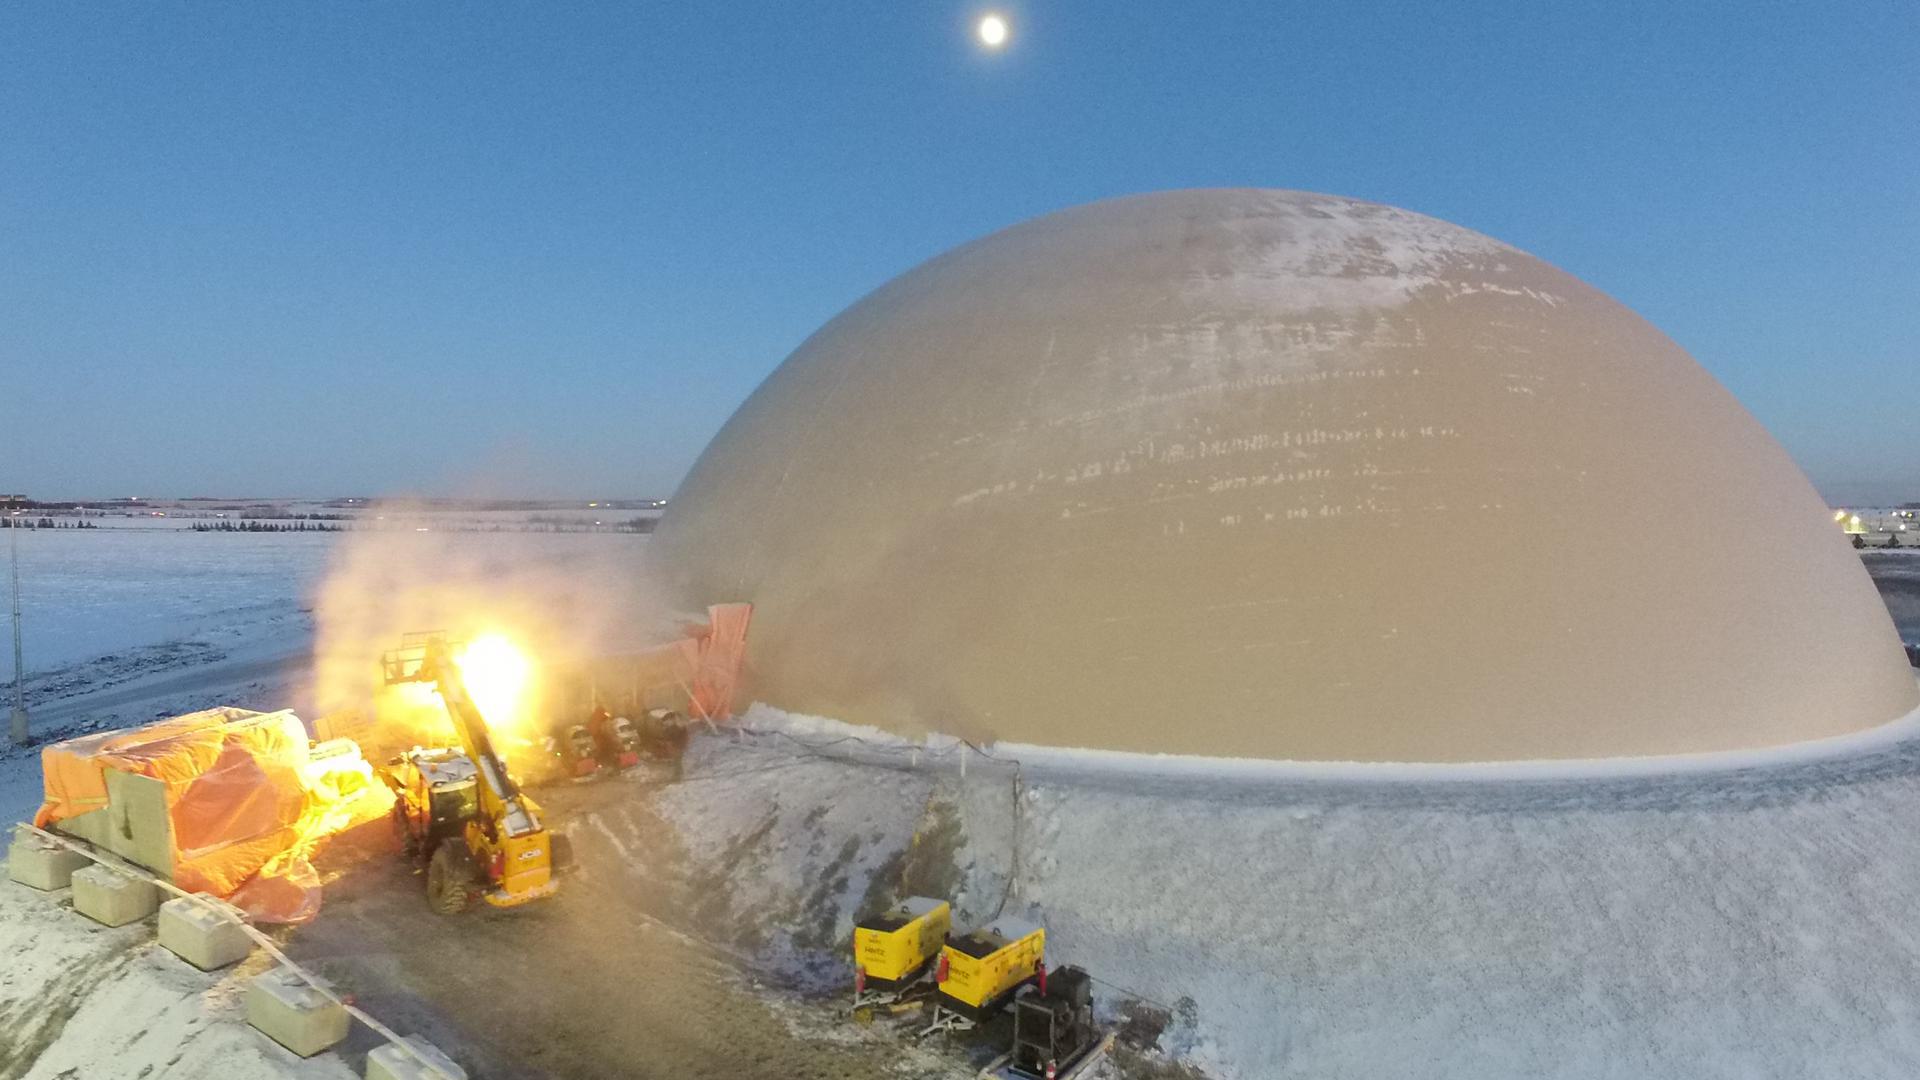 Snow highlights the elegant lines of the transverse Airform of this 182-foot diameter Monolithic Dome frac sand storage in Alberta, Canada.